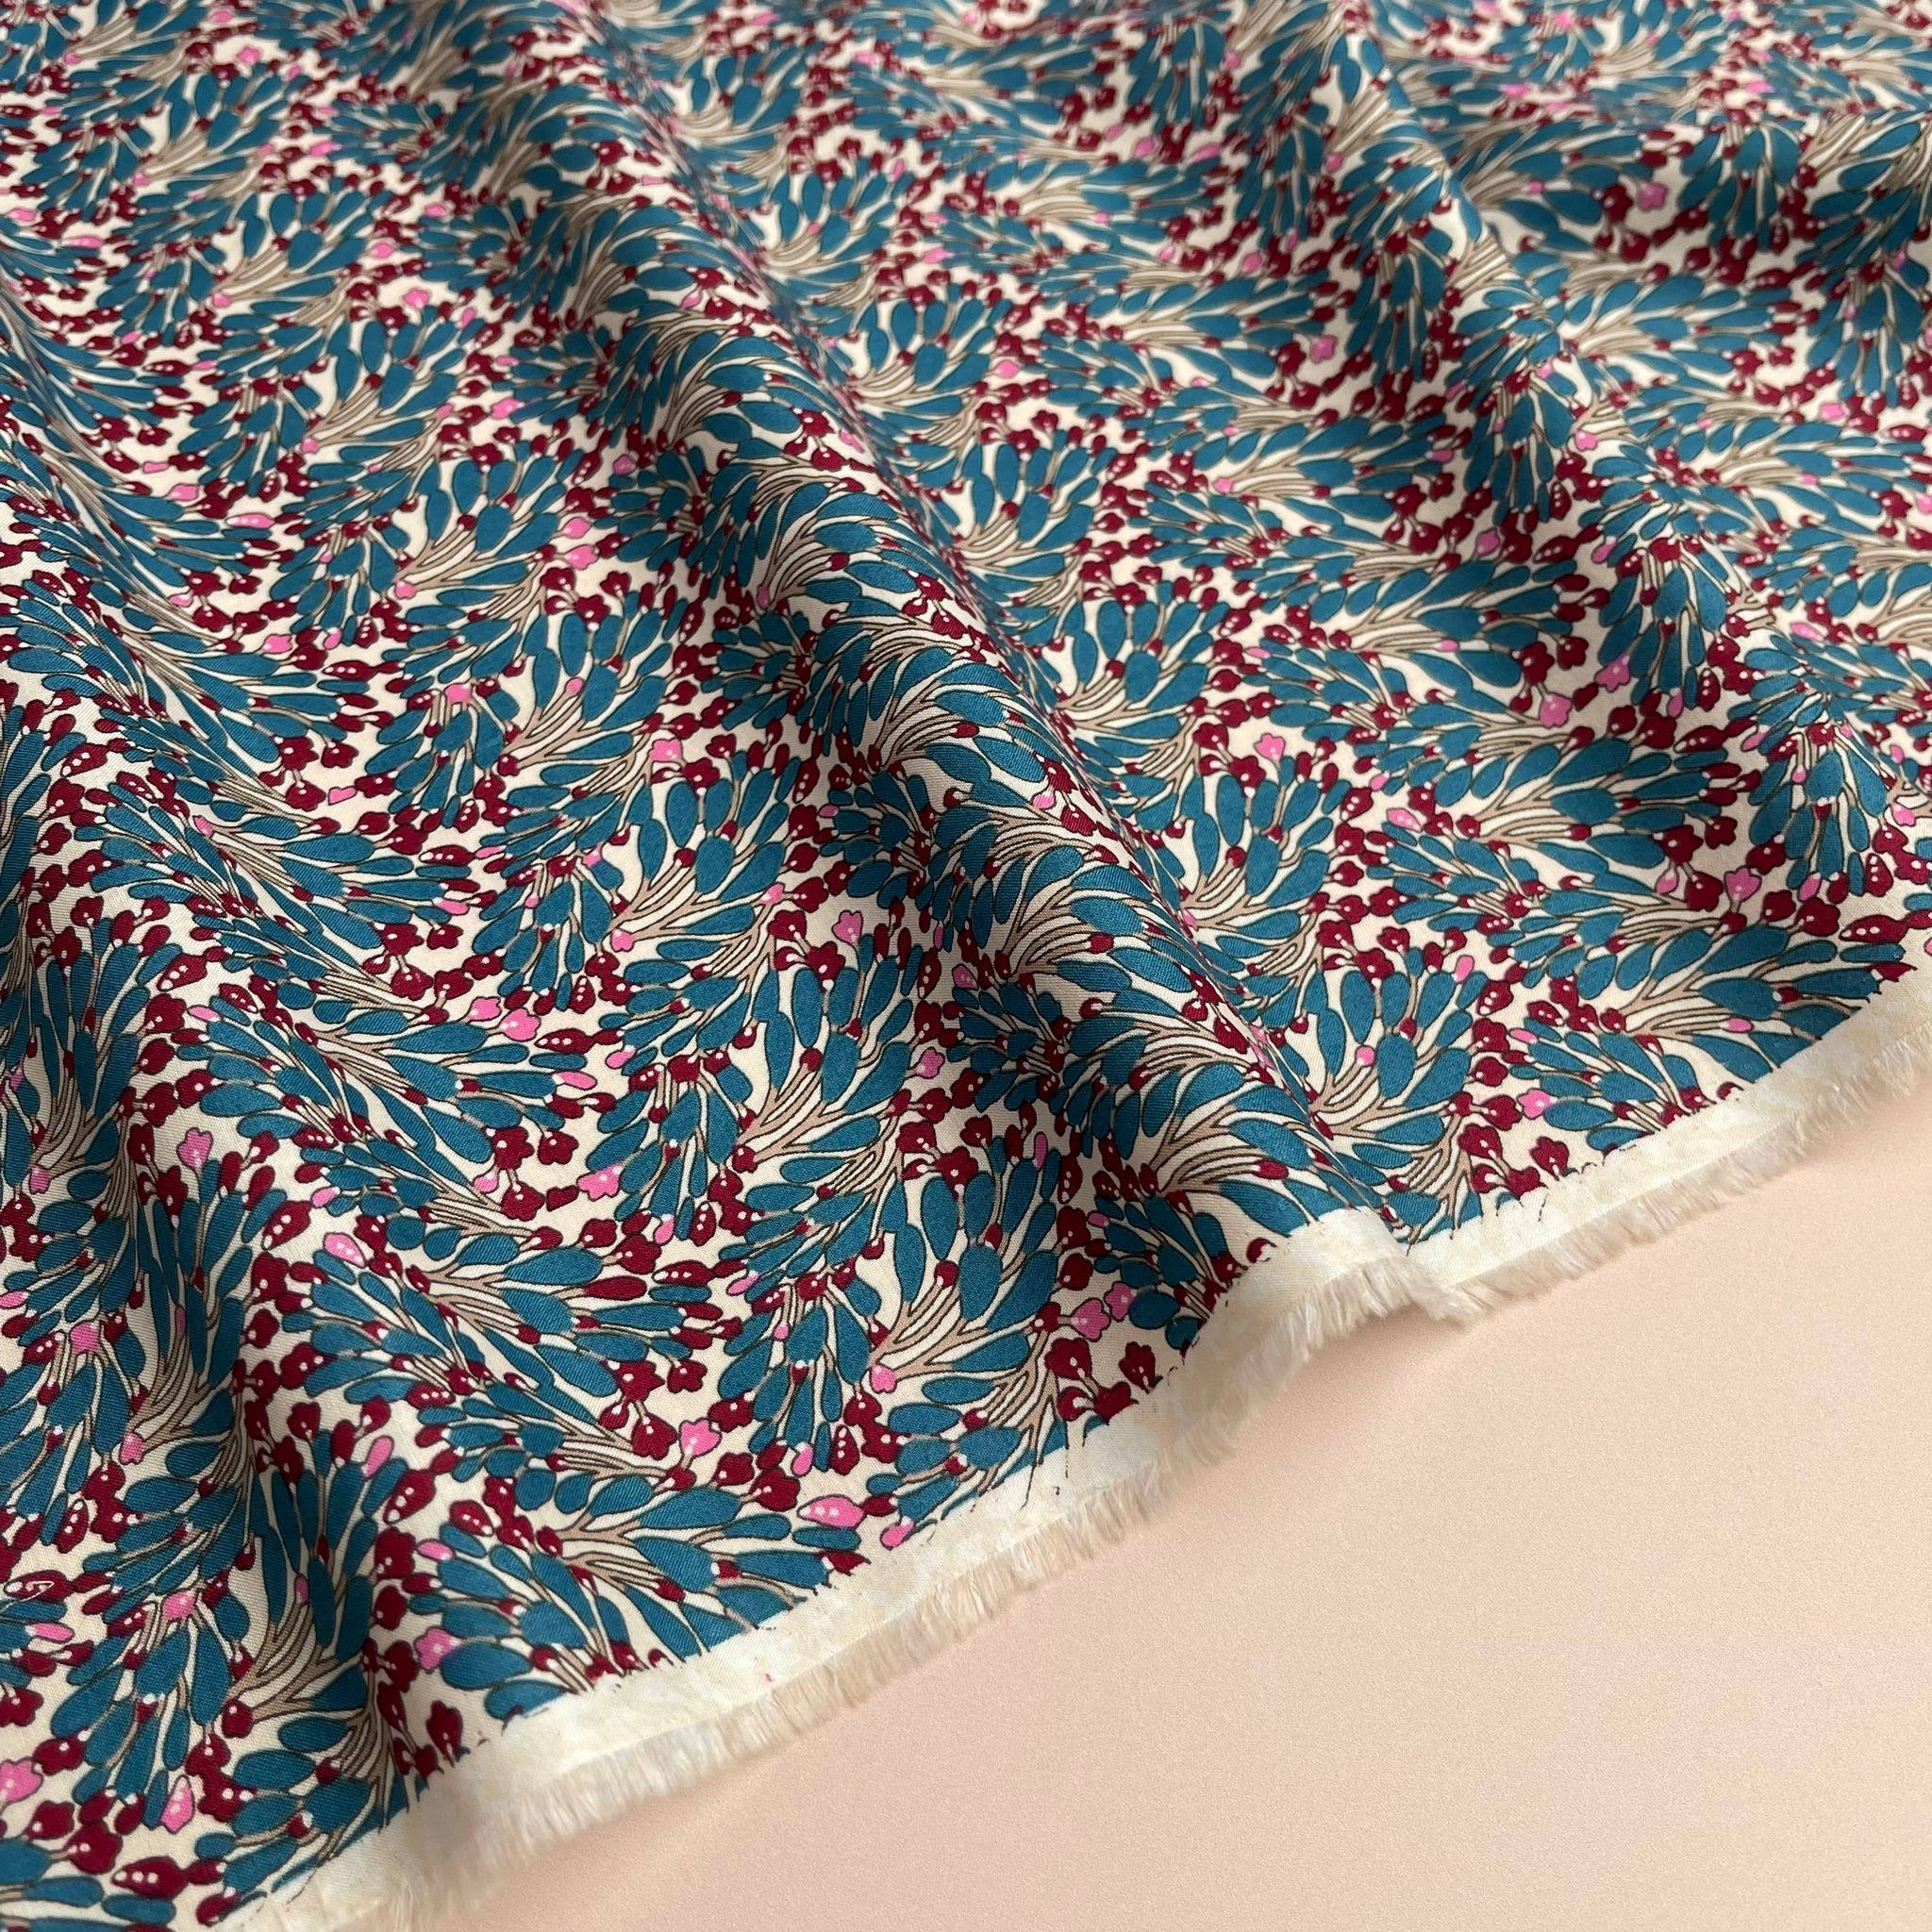 Graphic Seaweed Teal Cotton Lawn Fabric